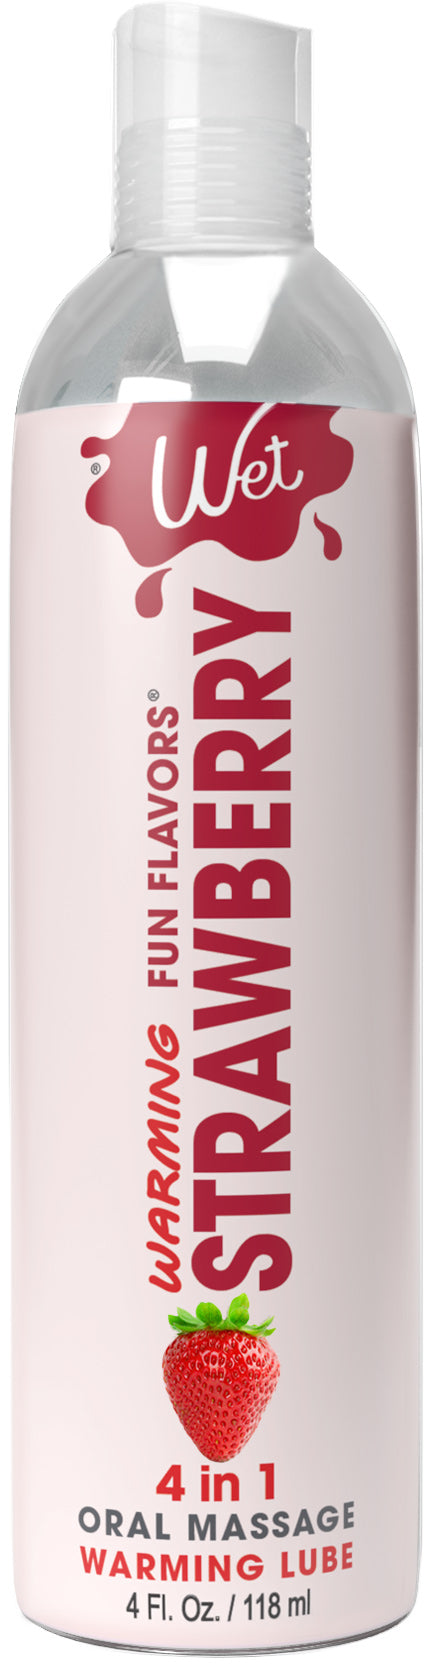 Wet Warming Fun Flavors - Strawberry - 4 in 1 Lubricant 4 Oz